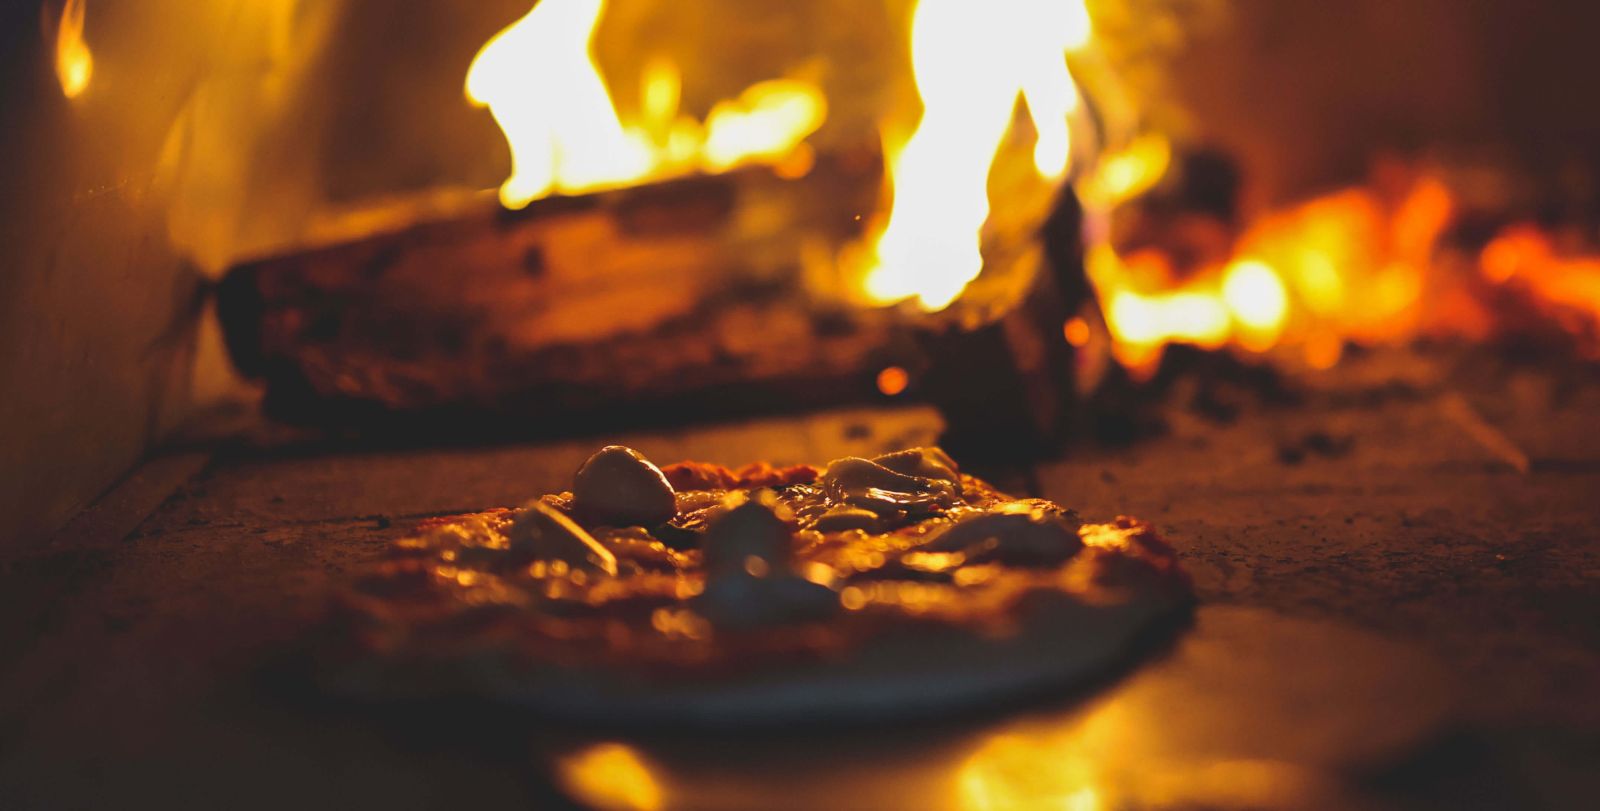 This image shows delicious pizza being placed in the Wood Fired Pizza Oven